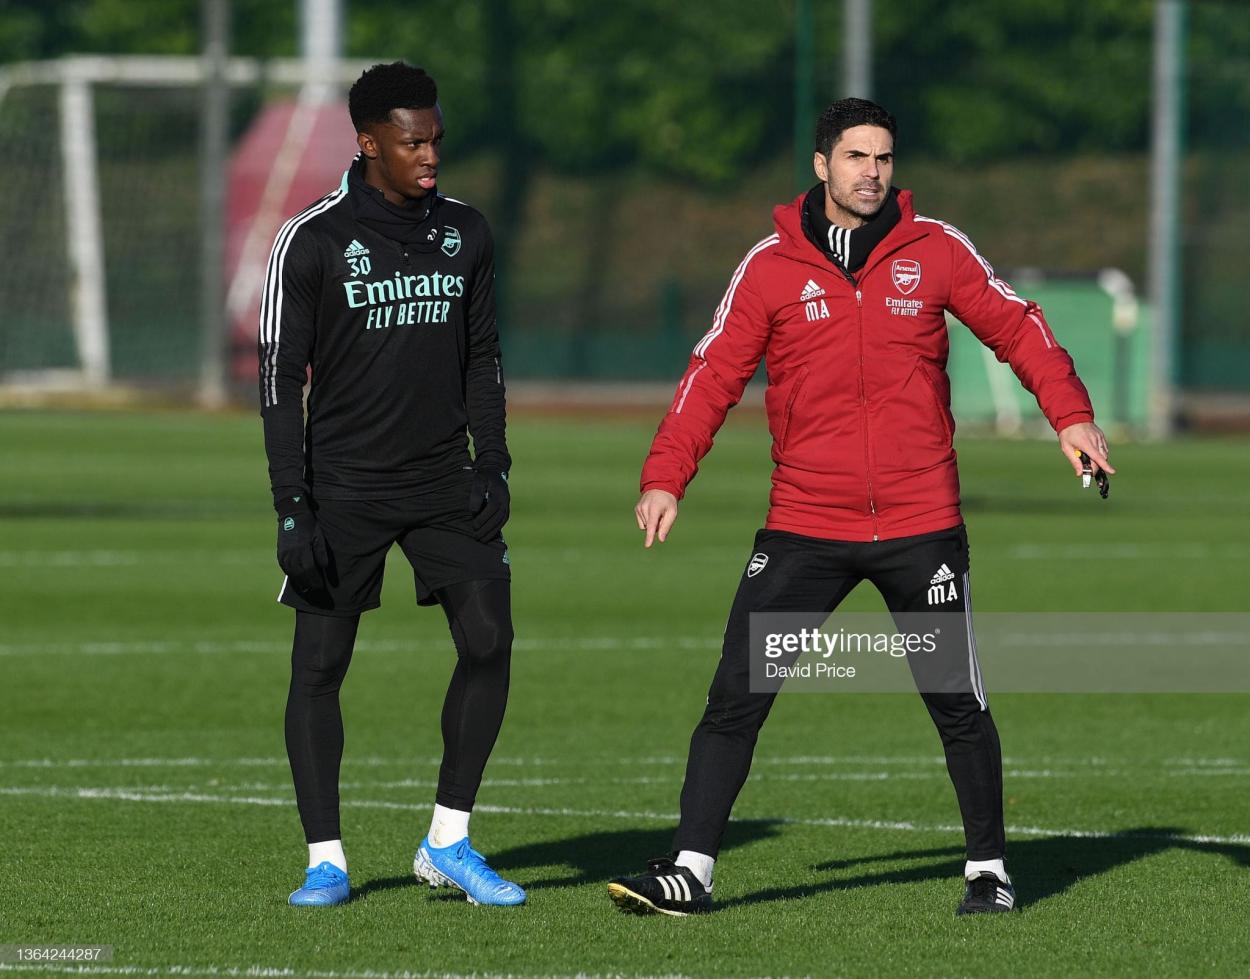 ST ALBANS, ENGLAND - JANUARY 12: Mikel Arteta the Arsenal Manager with Eddie ketiah during the Arsenal training session at London Colney on January 12, 2022 in St Albans, England. (Photo by David Price/Arsenal FC via Getty Images)